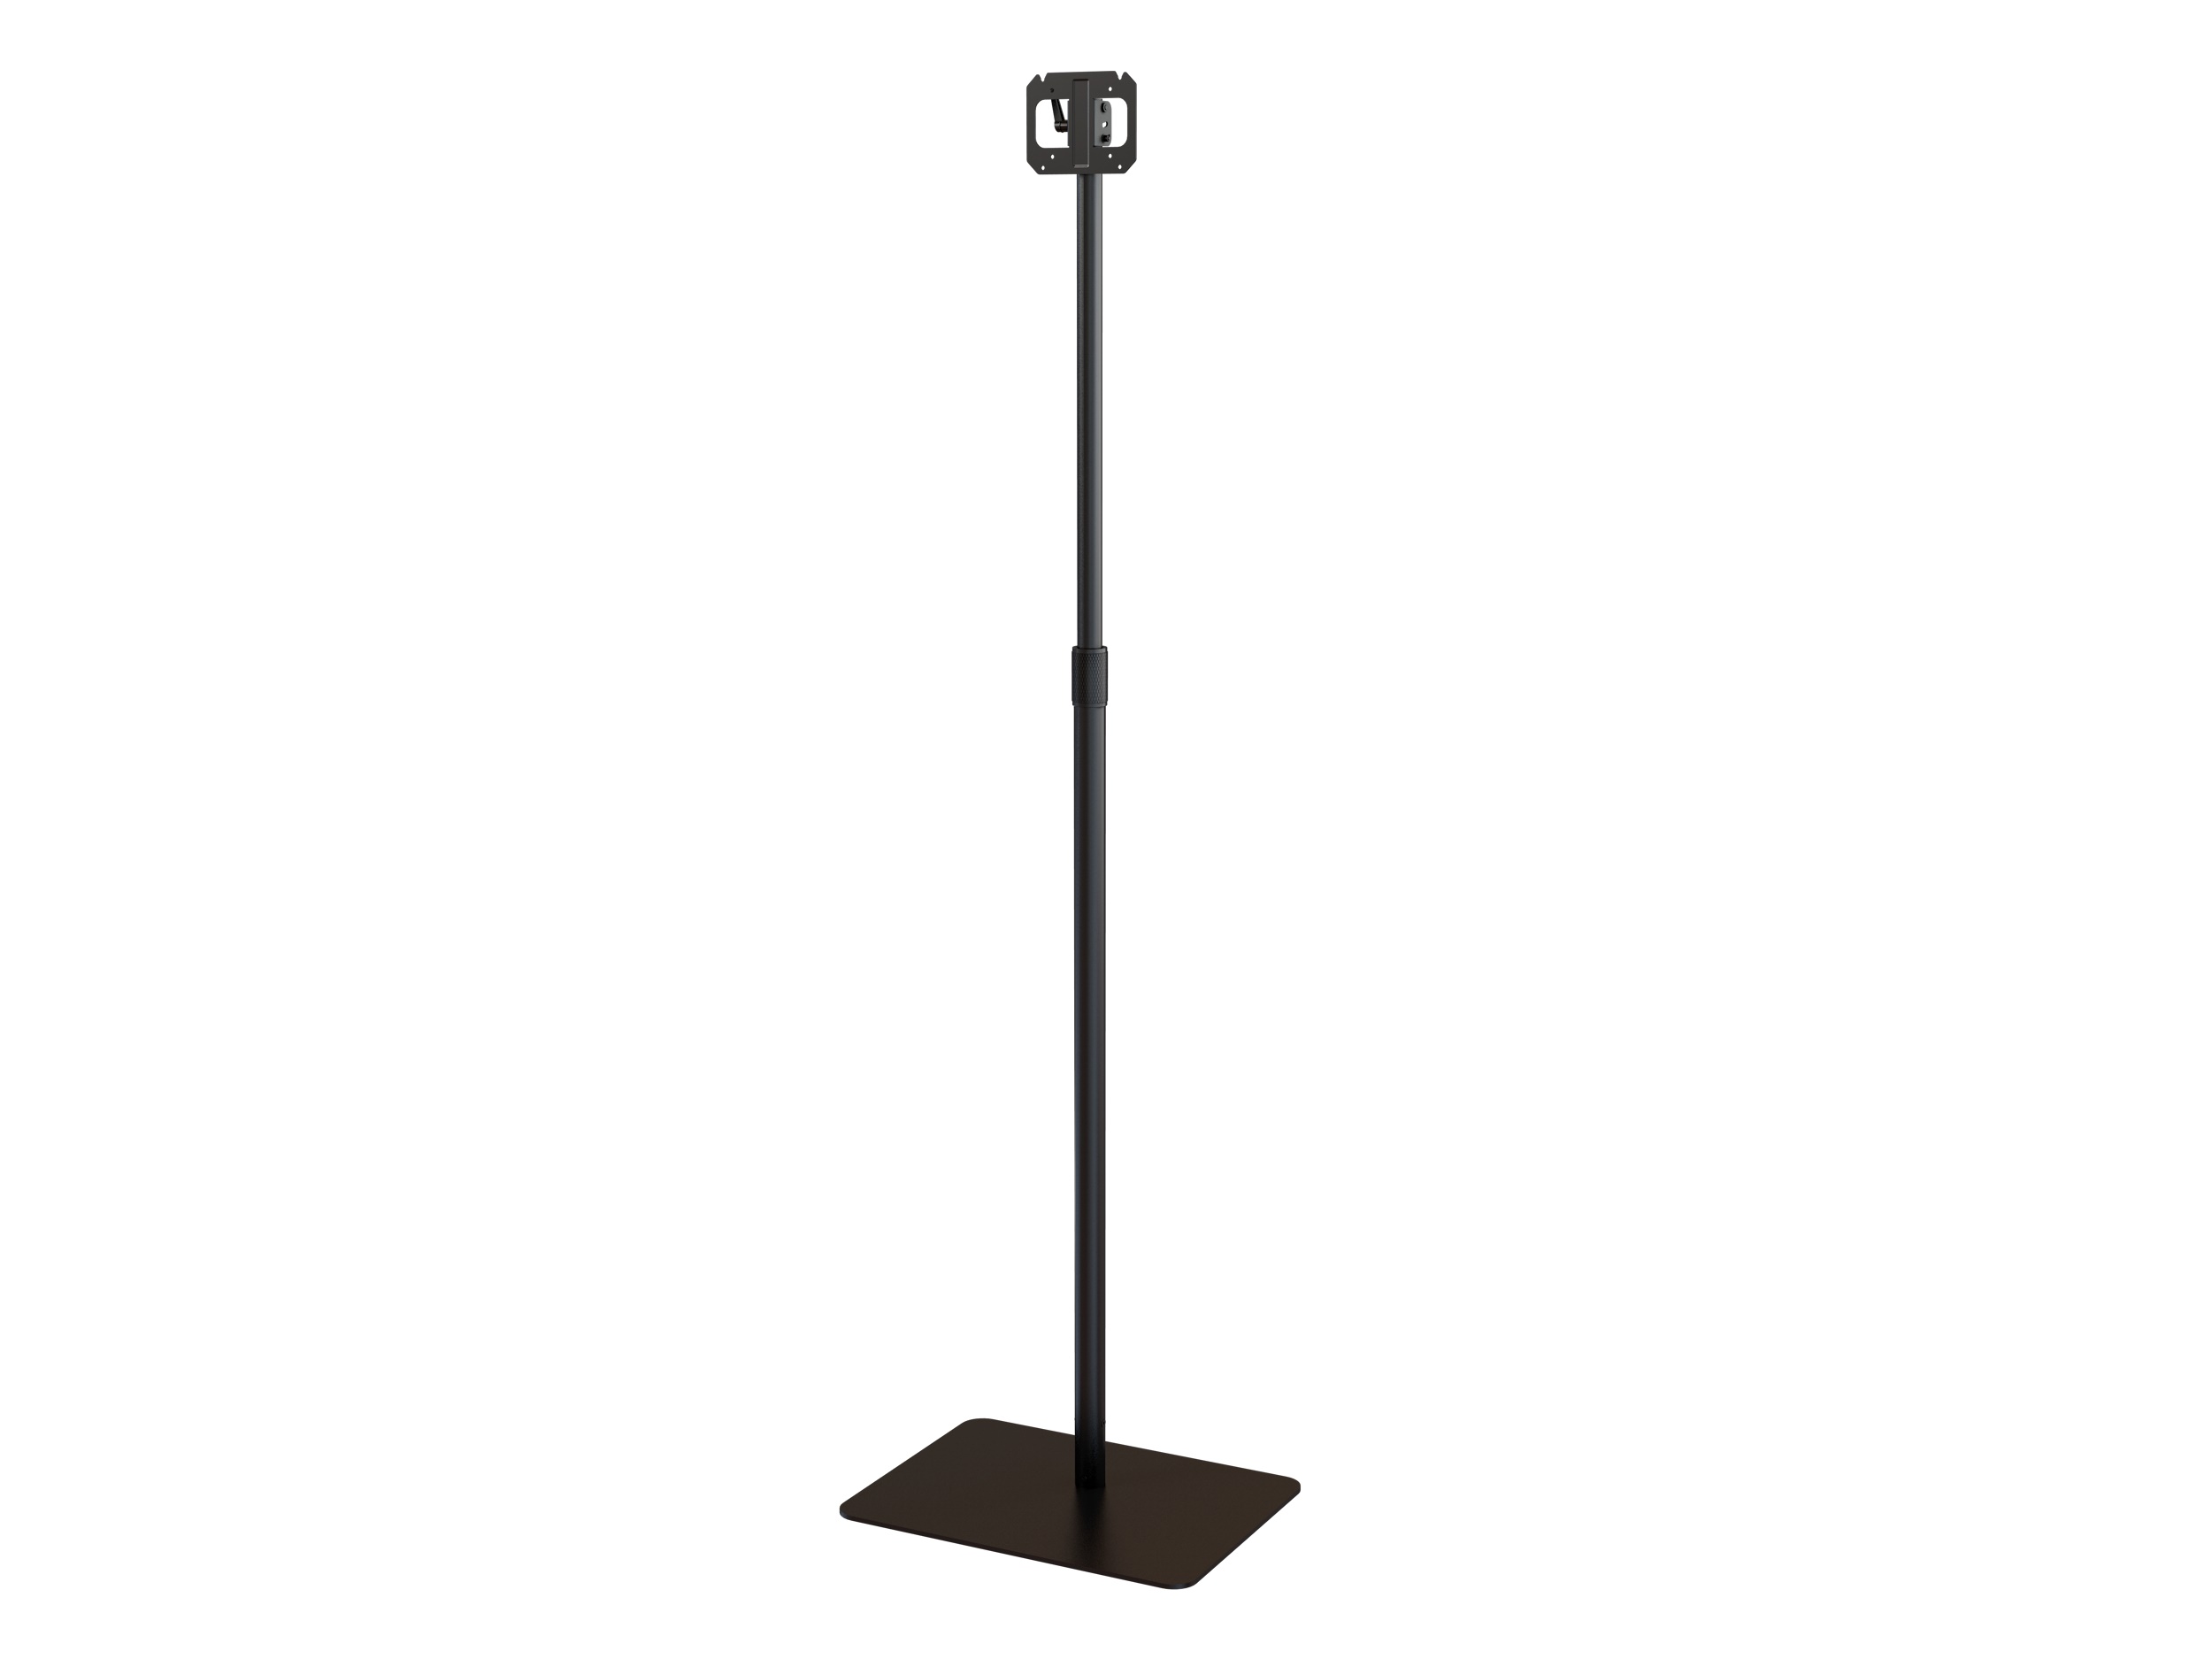 Aurora Multimedia APS-1 Adjustable Pole Stand for the Tauri Temperature Tablet Series